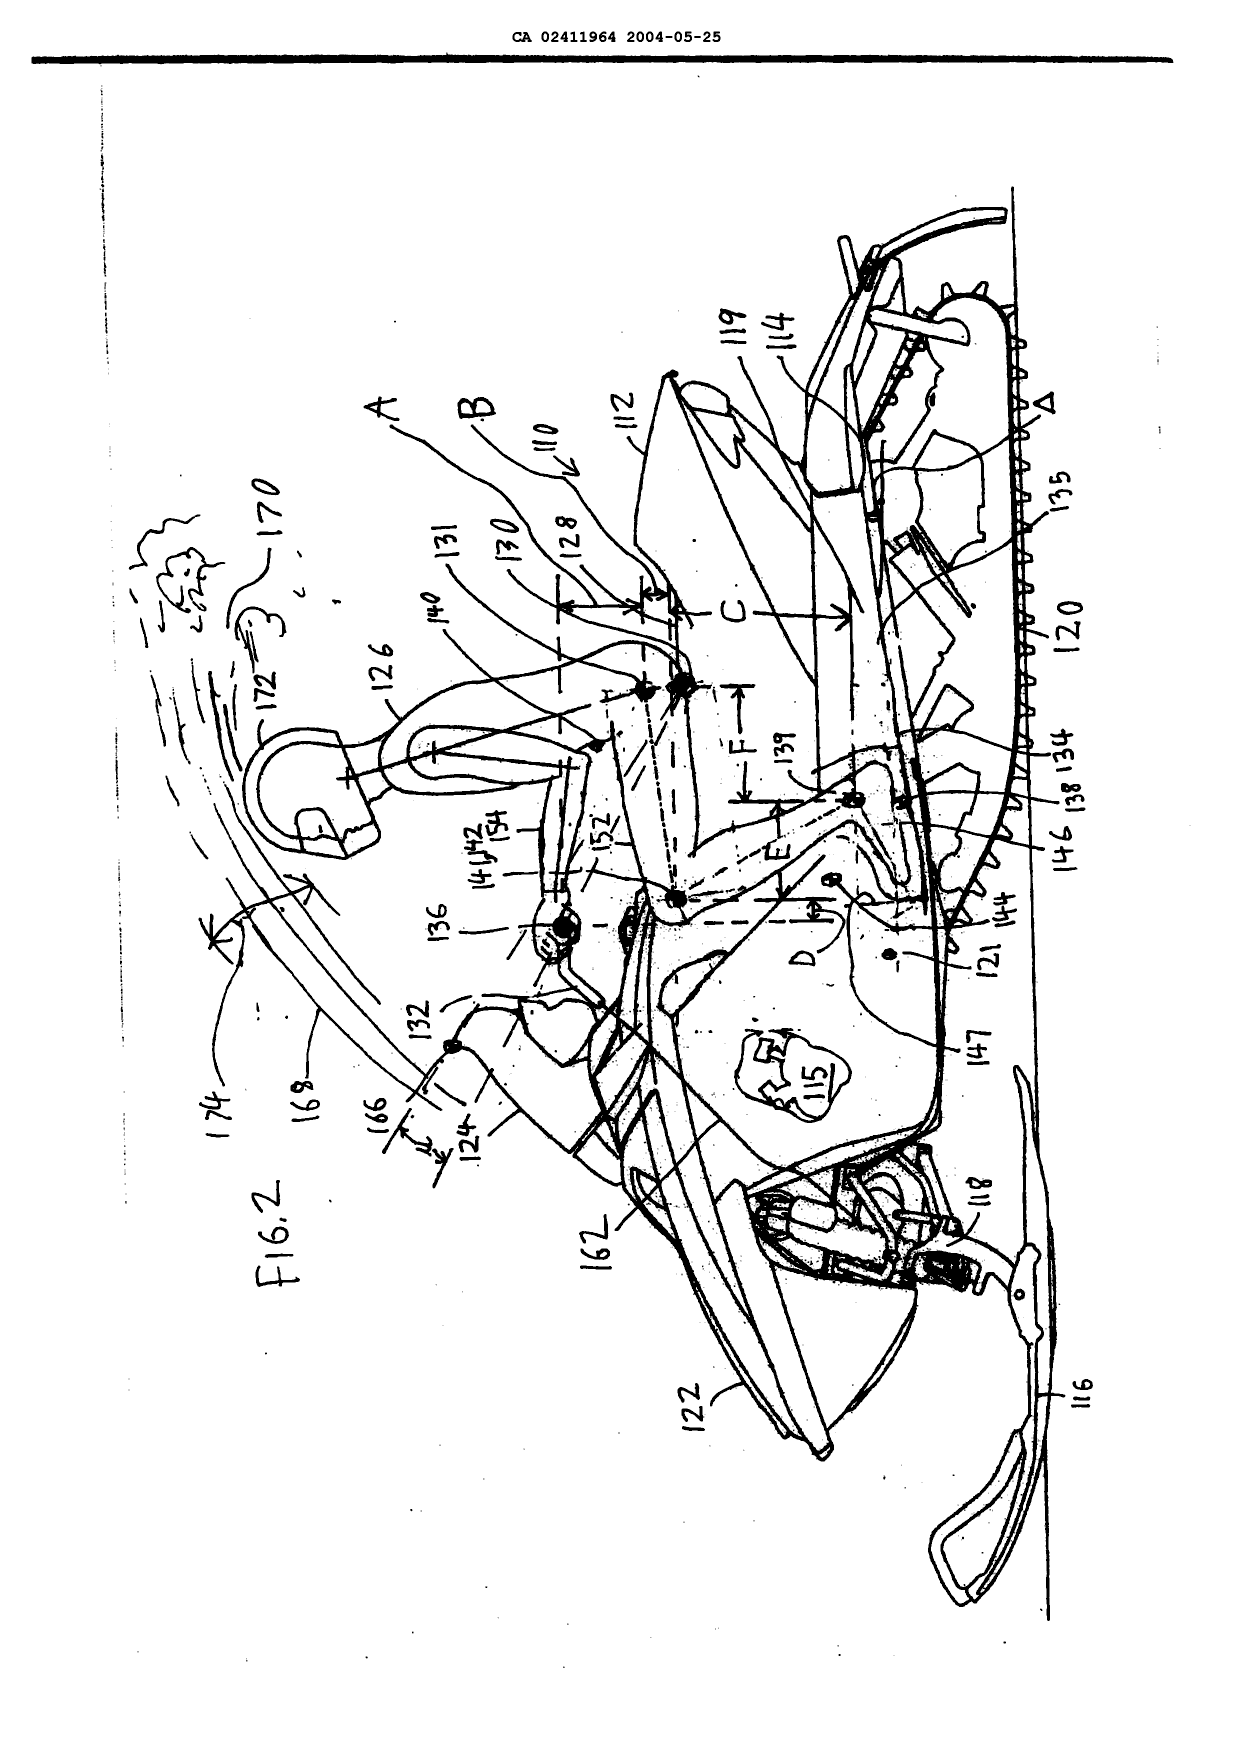 Canadian Patent Document 2411964. Drawings 20040525. Image 2 of 7